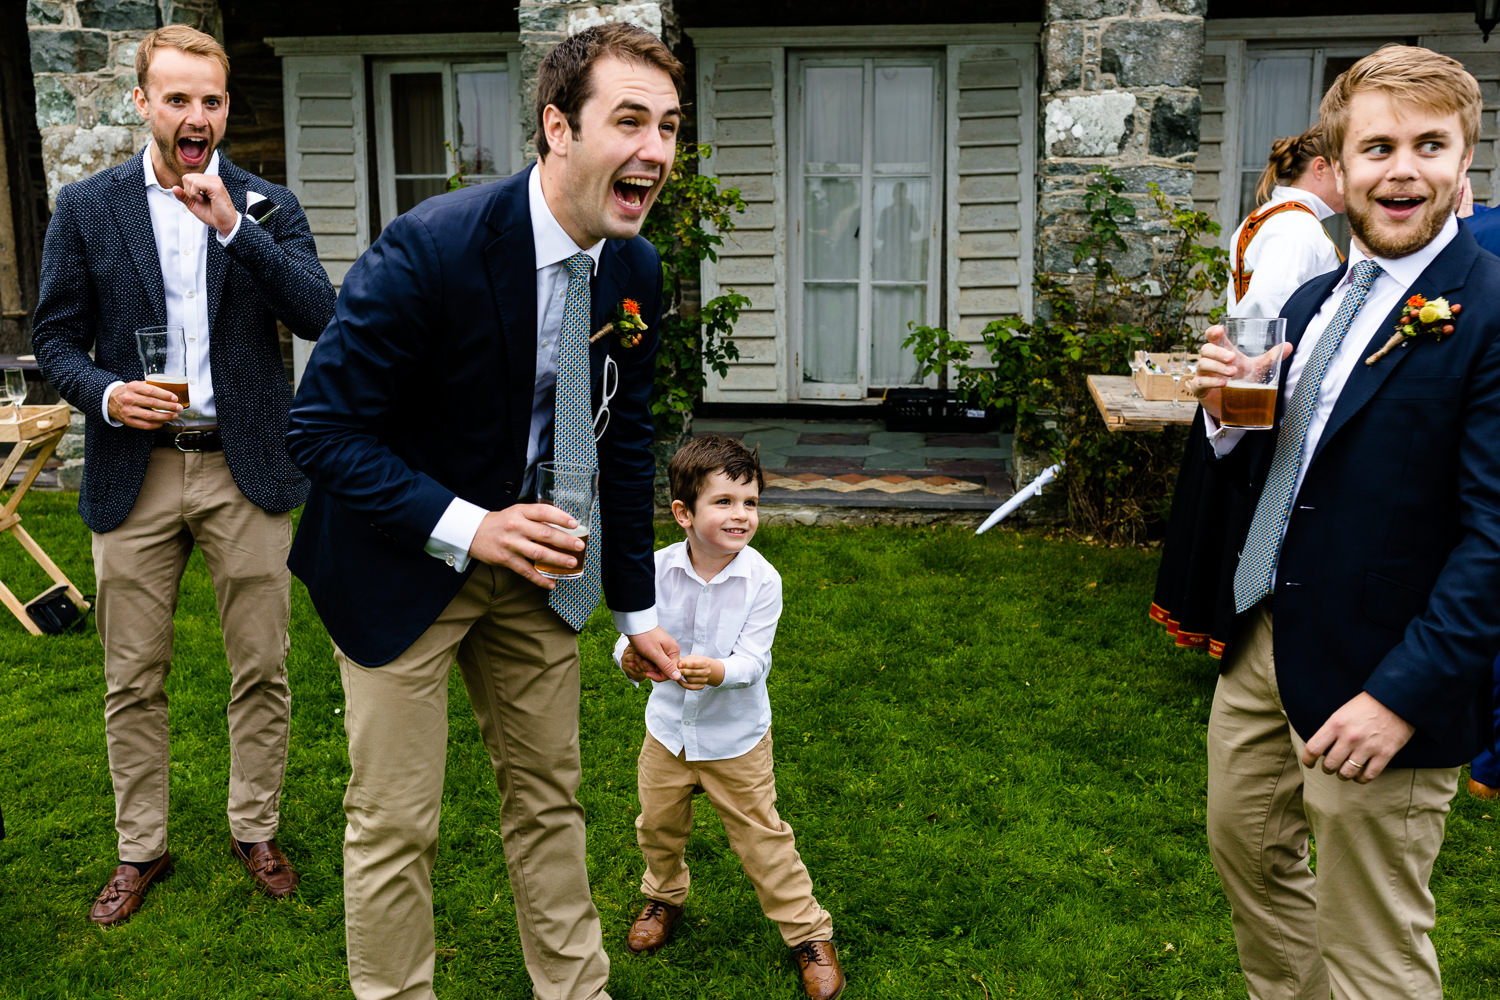 A groomsman laughing at what a young boy  has said, relaxed Anglesey wedding photo